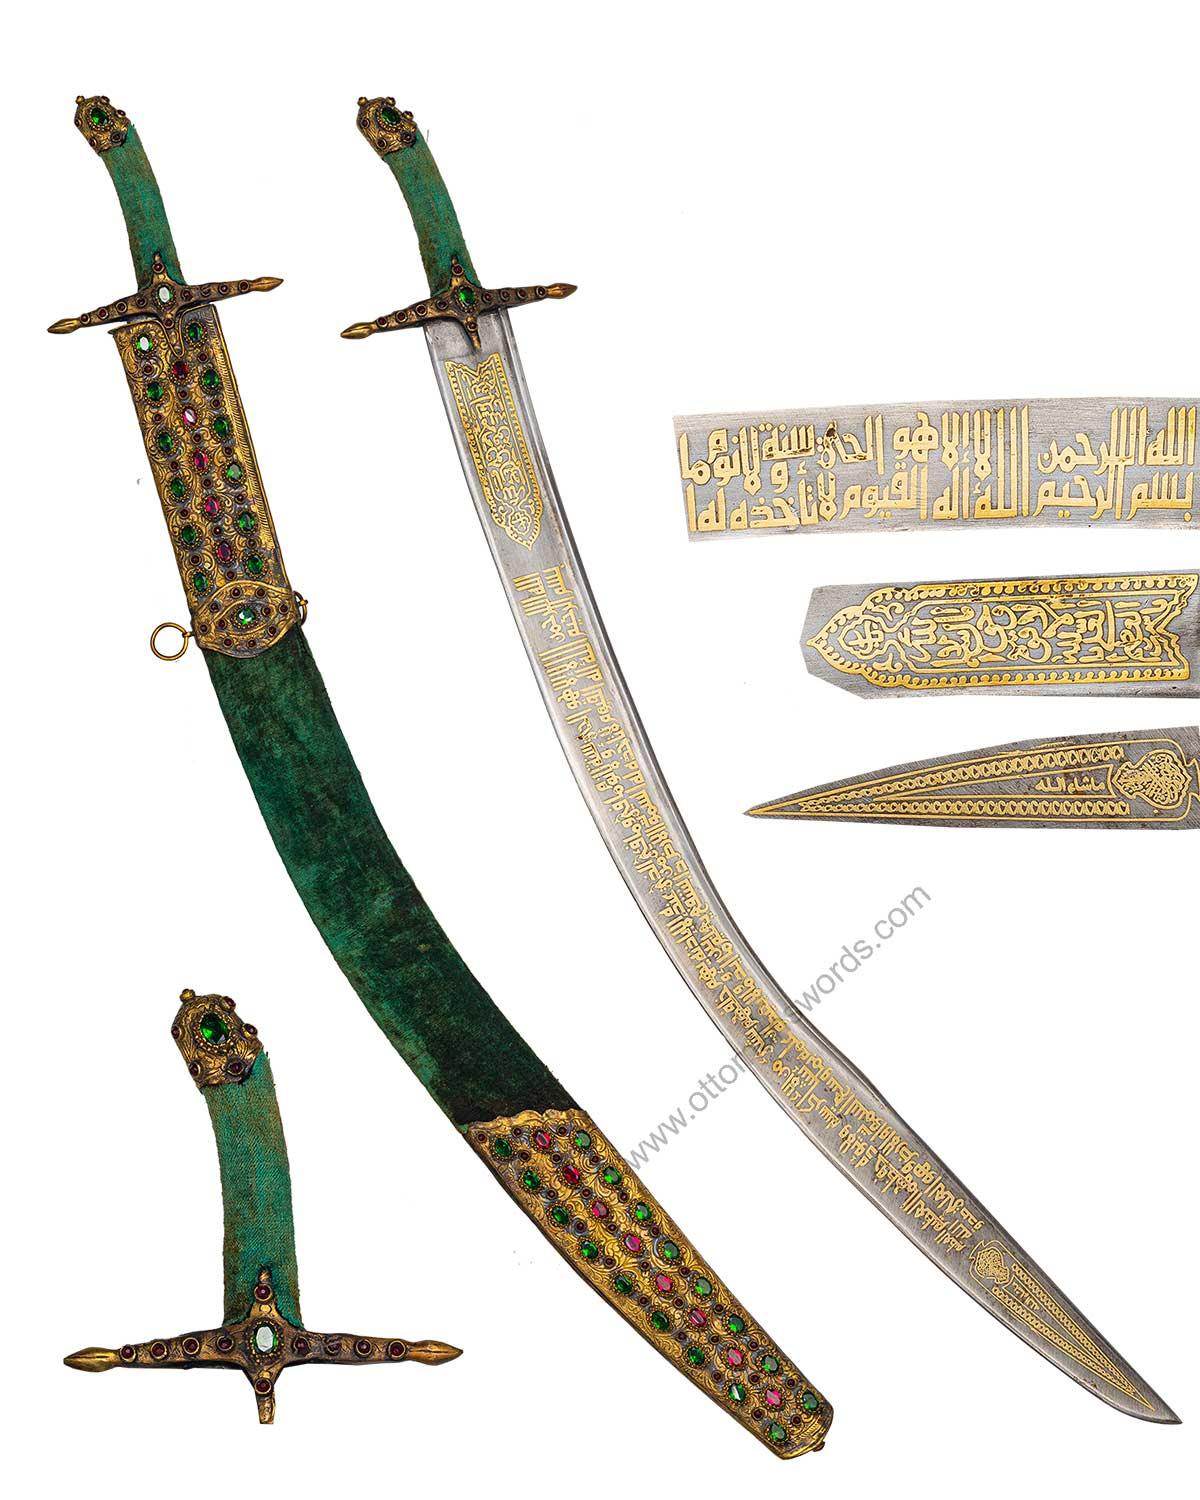 Brass Engrave Kilij Sword With inlaid Stone Scabbard (5)